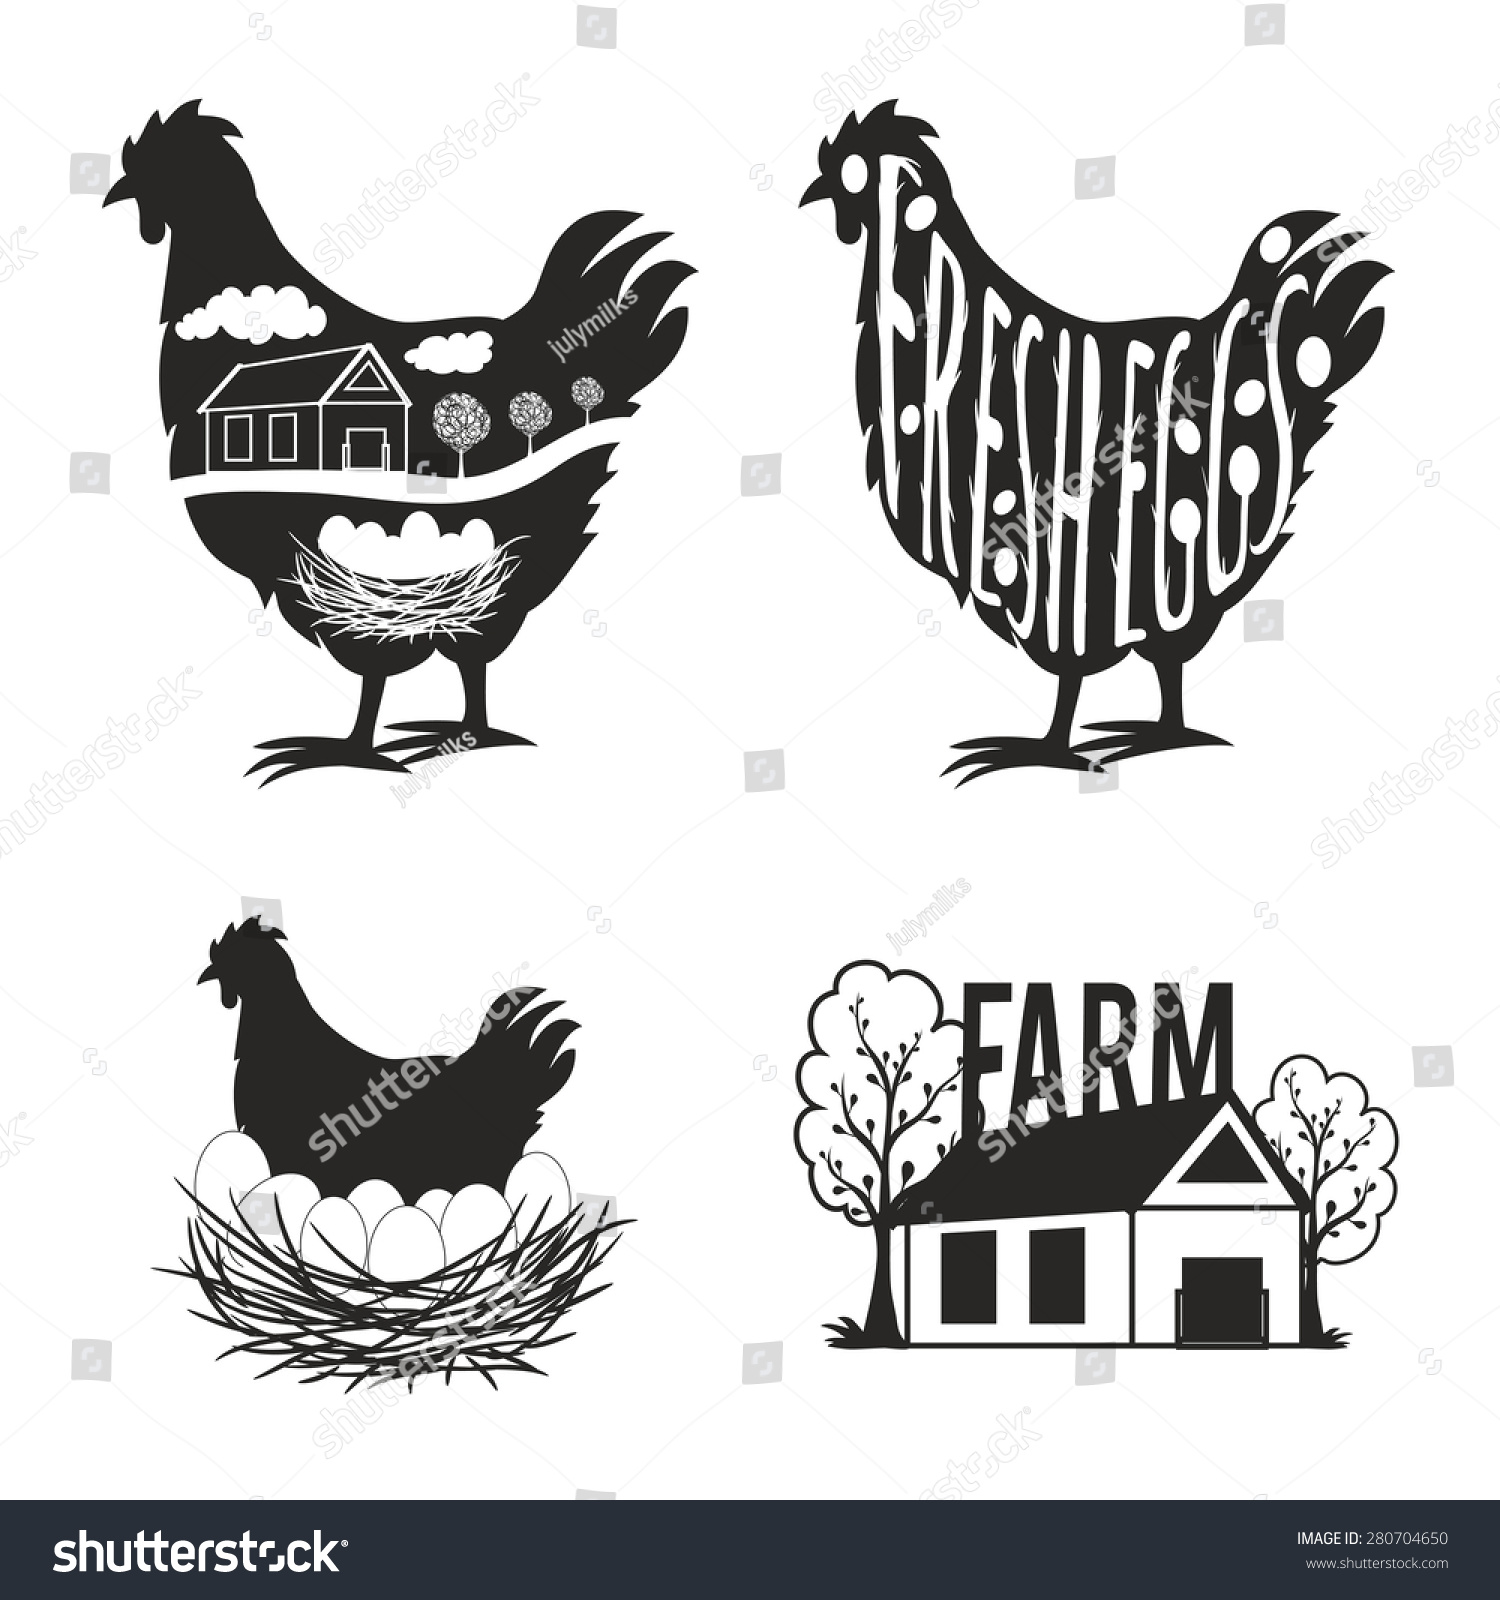 chicken lady clipart - photo #27